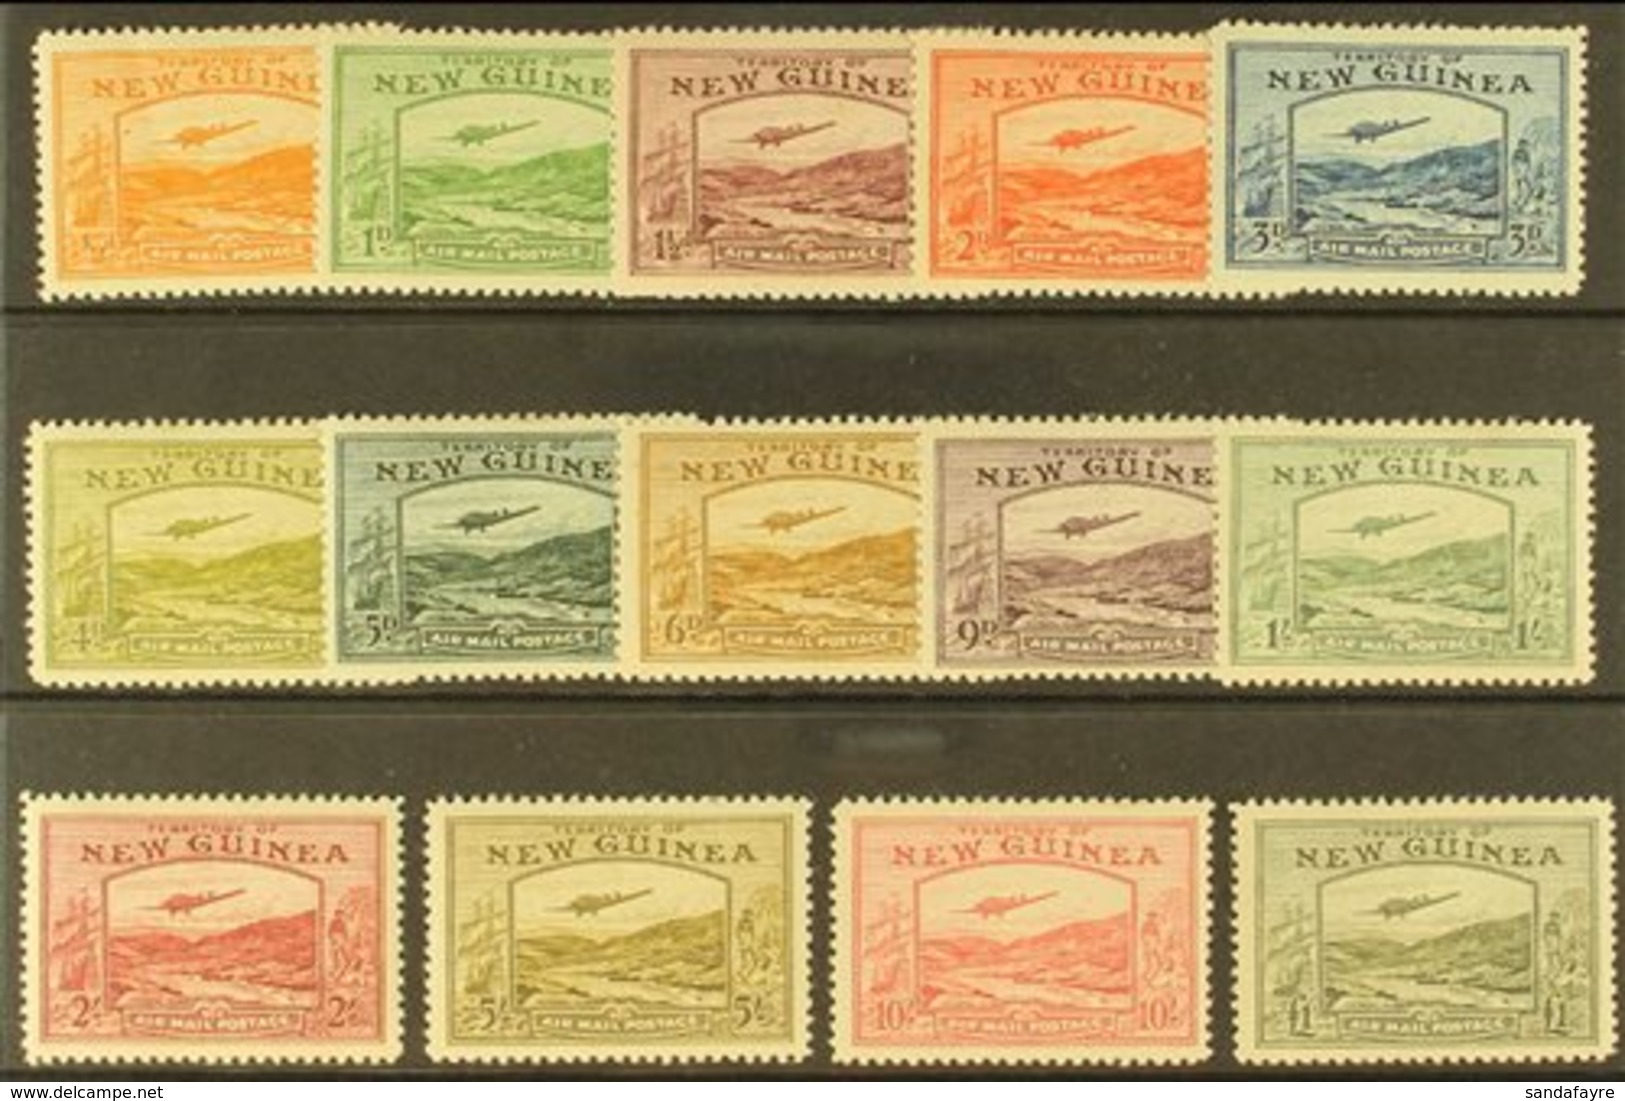 1939 AIRMAILS Bulolo Goldfields Set Inscribed "AIRMAIL POSTAGE," SG 212/25, Mint With Gently Toned Gum, Cat £1100 (14 St - Papouasie-Nouvelle-Guinée